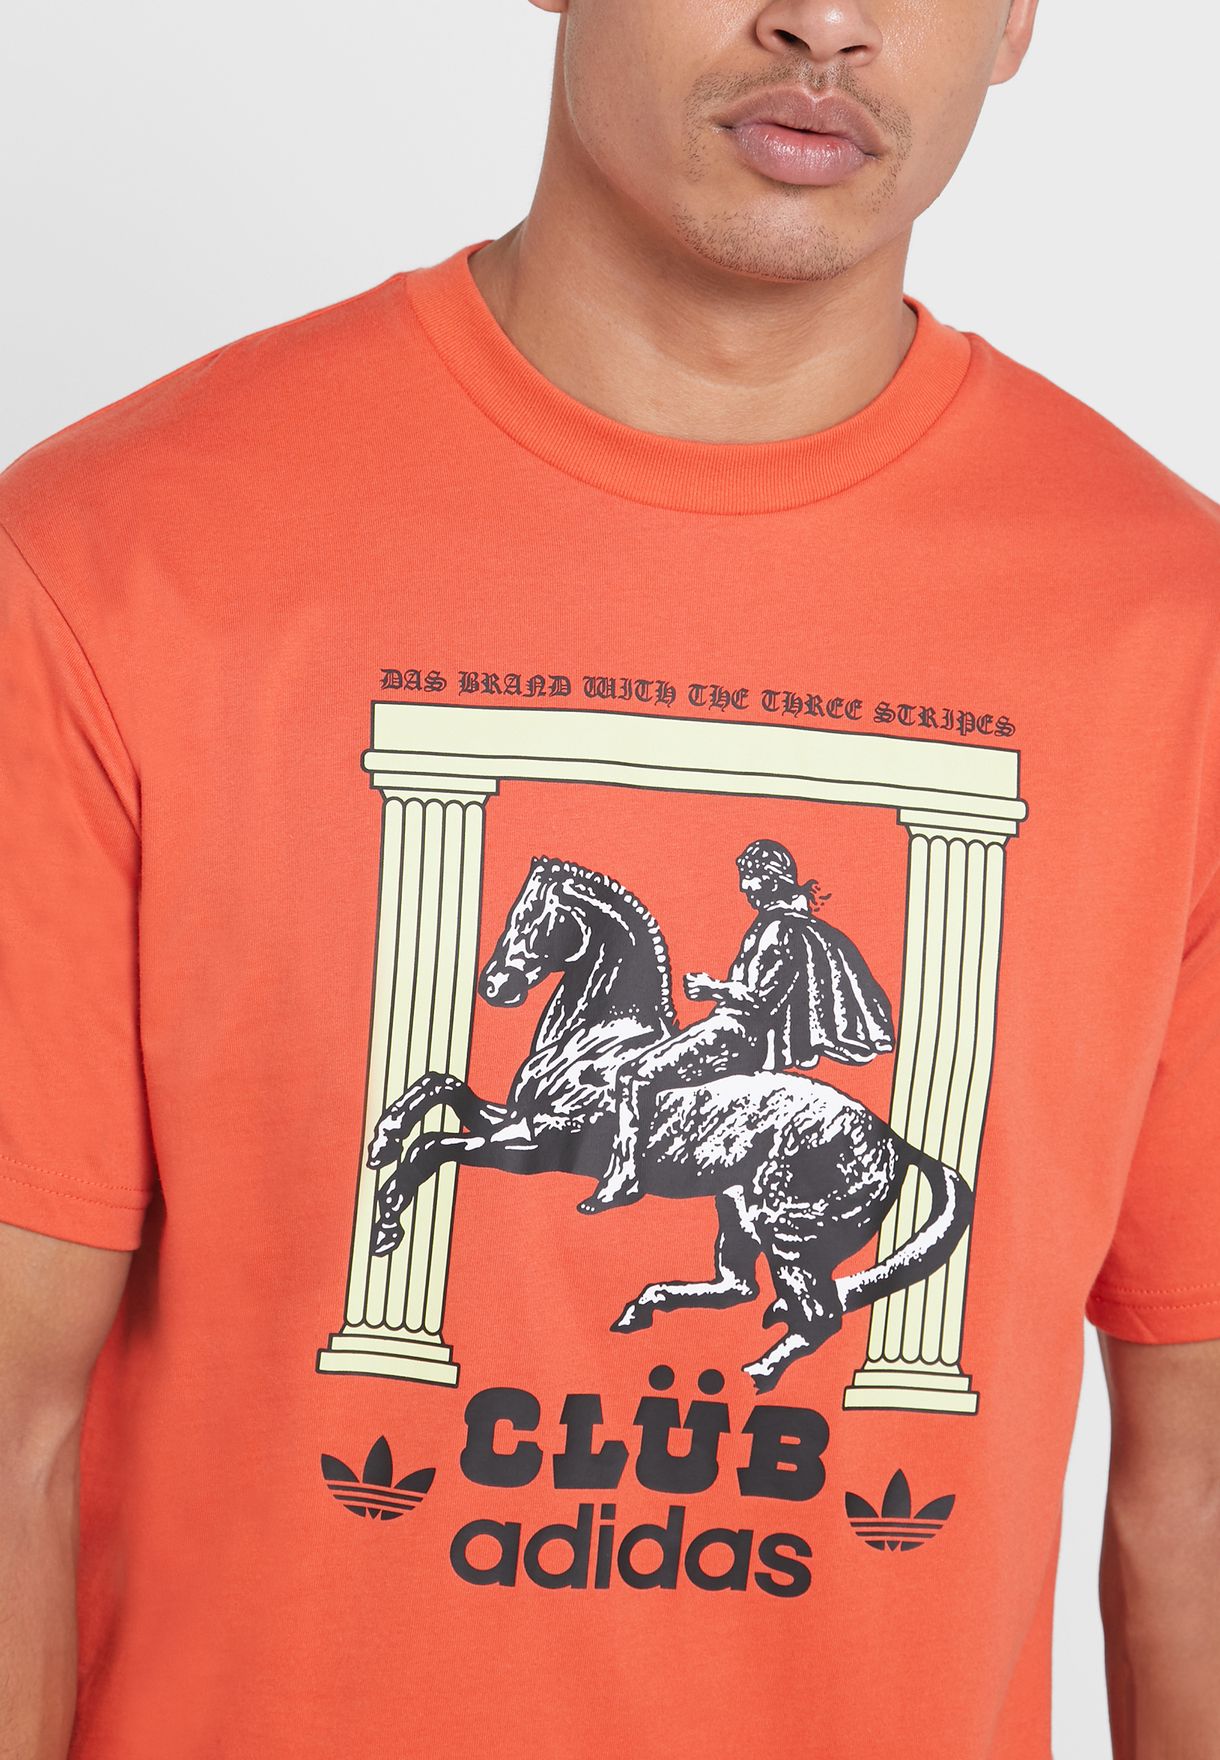 adidas limited edition t shirt horse